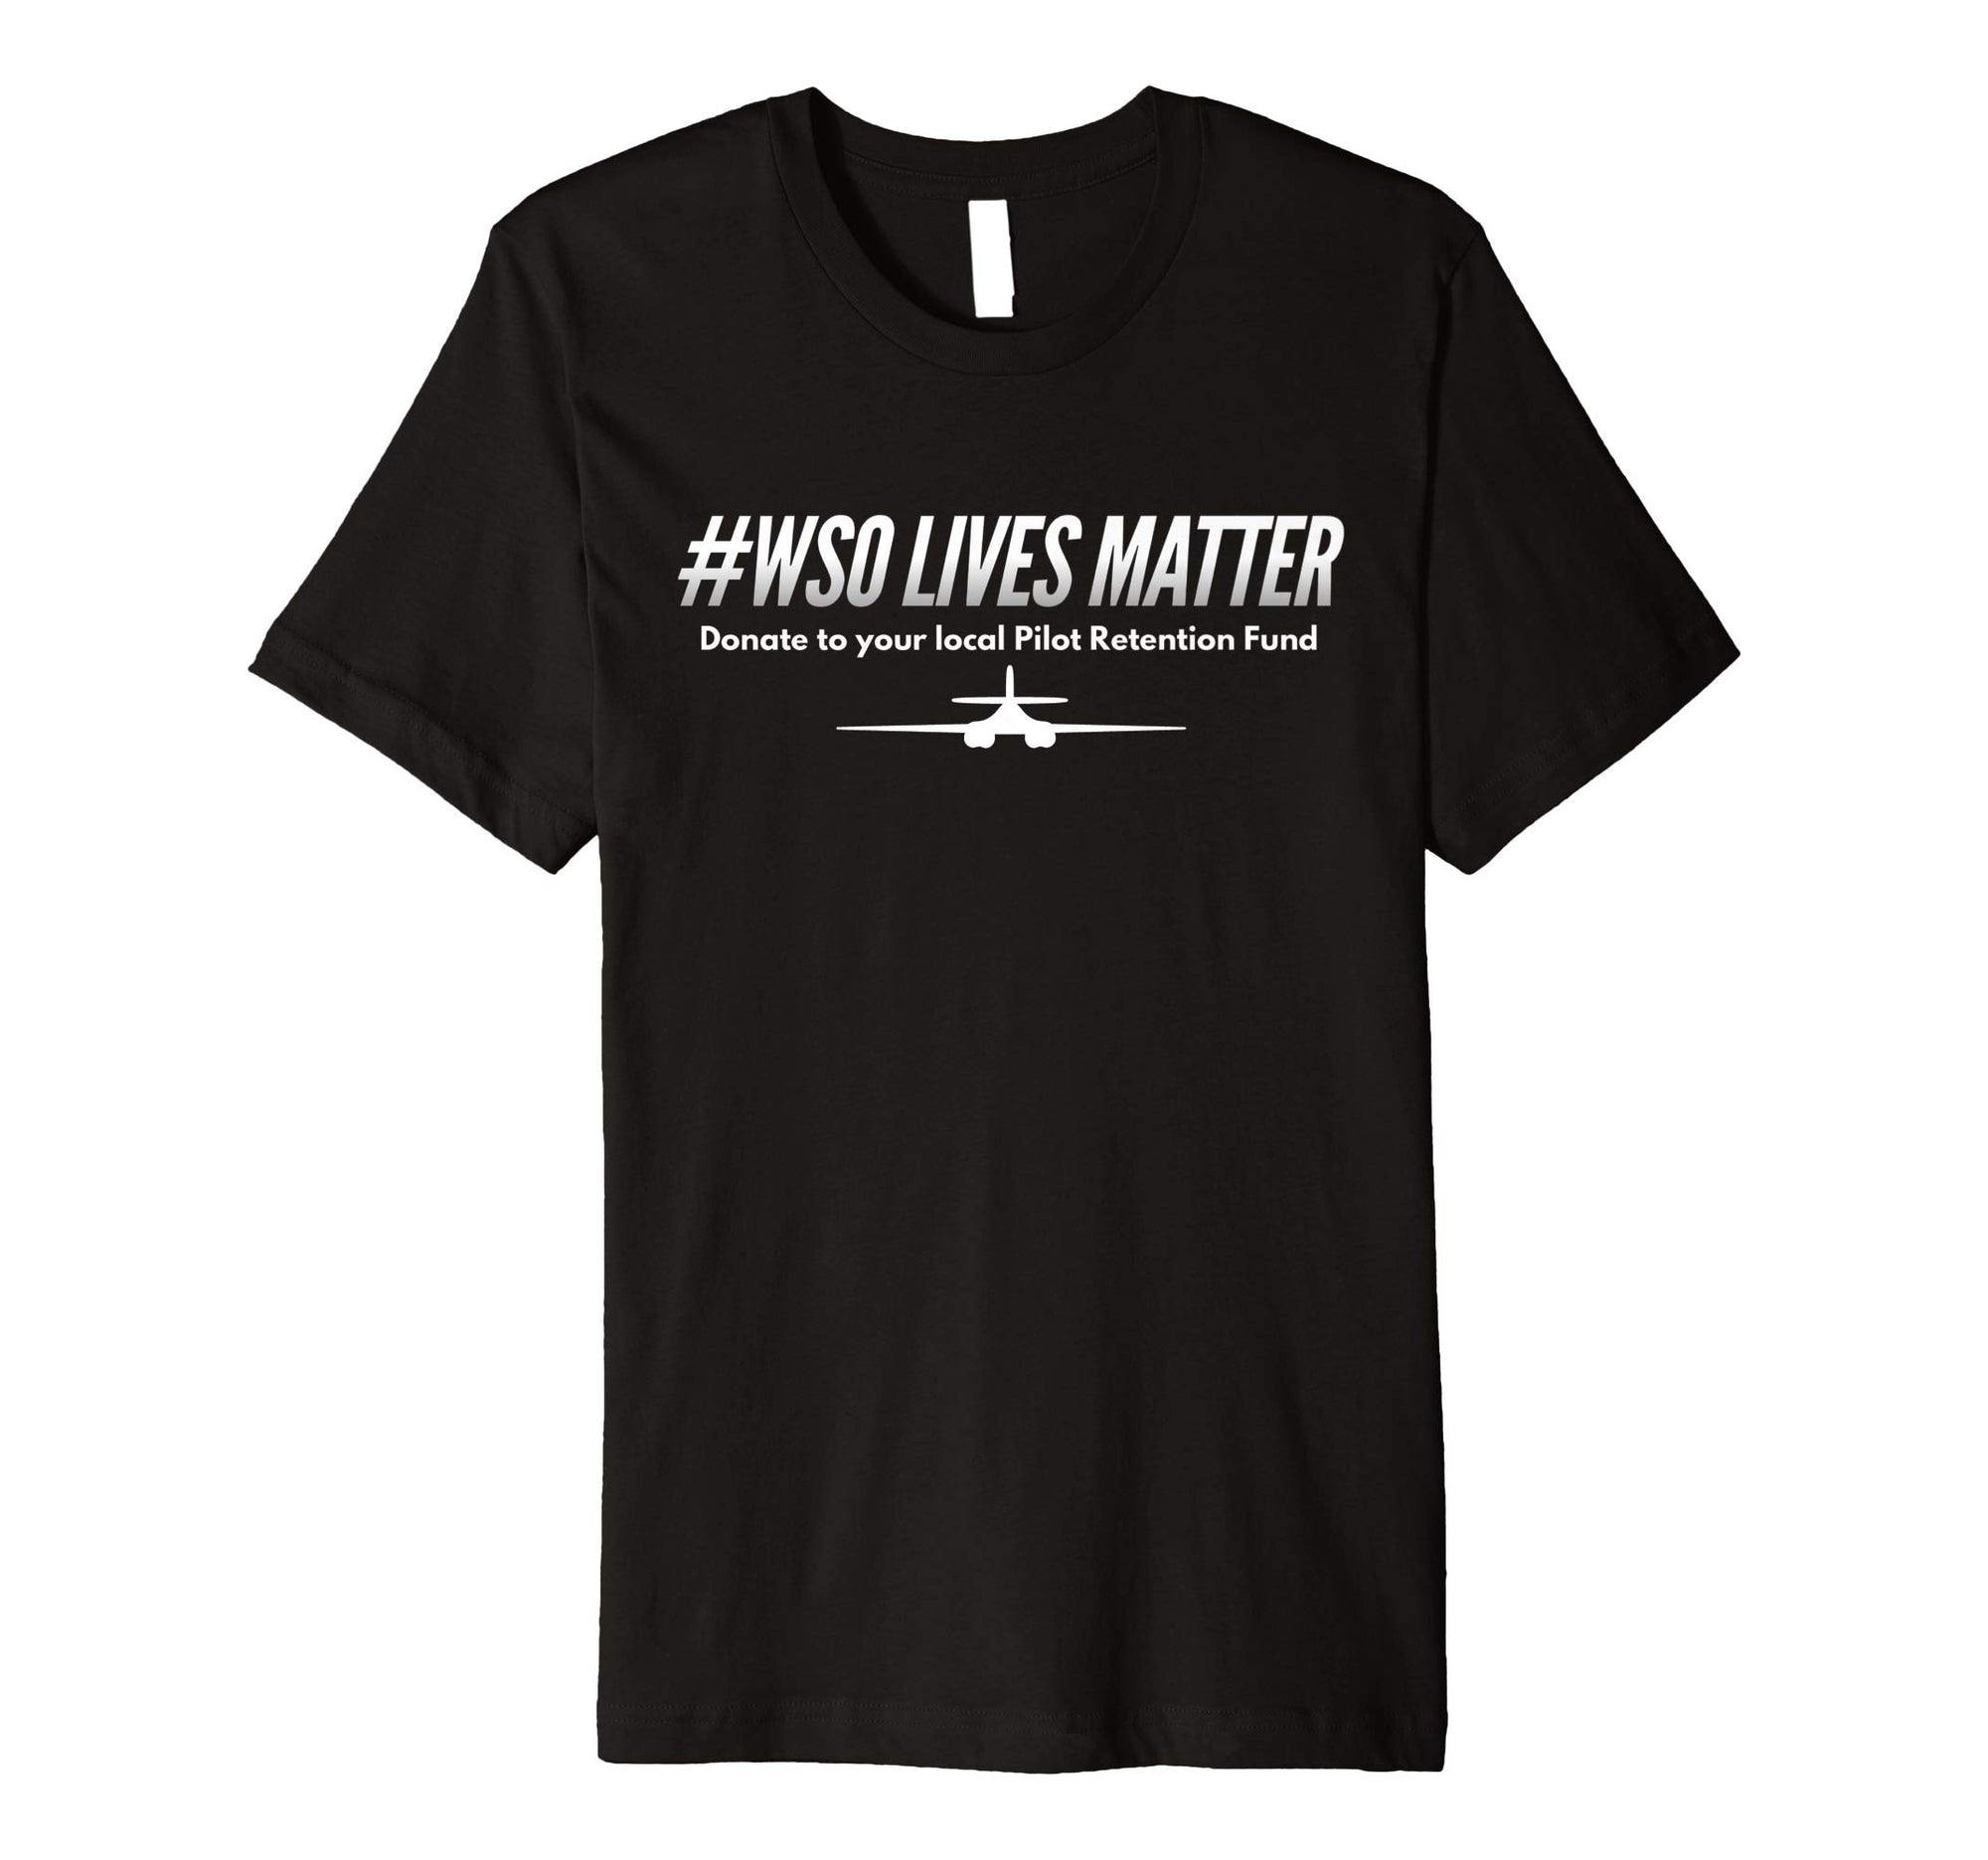 #WSO Lives Matter - Donate to the Pilot Retention Fund